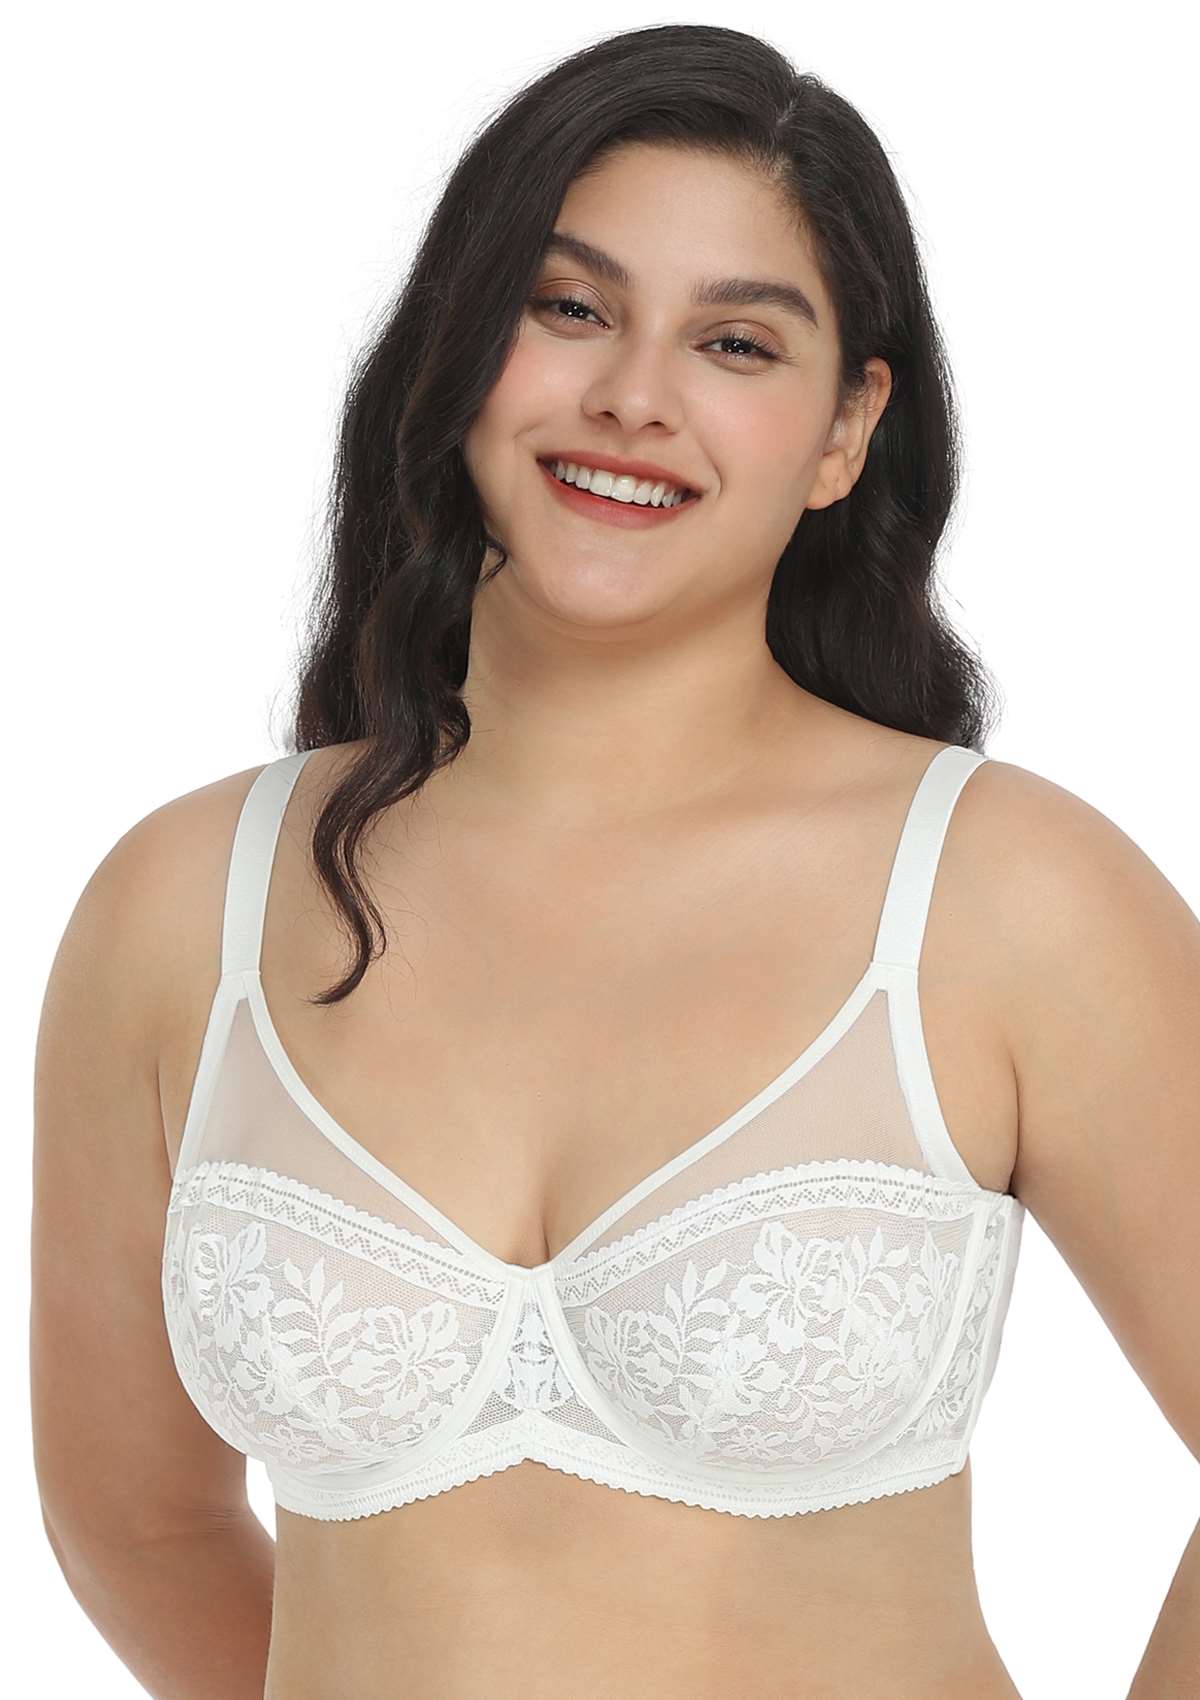 HSIA Gladioli Lace Mesh Minimizing Unlined Underwire Bra For Fuller Busts - White / 44 / G